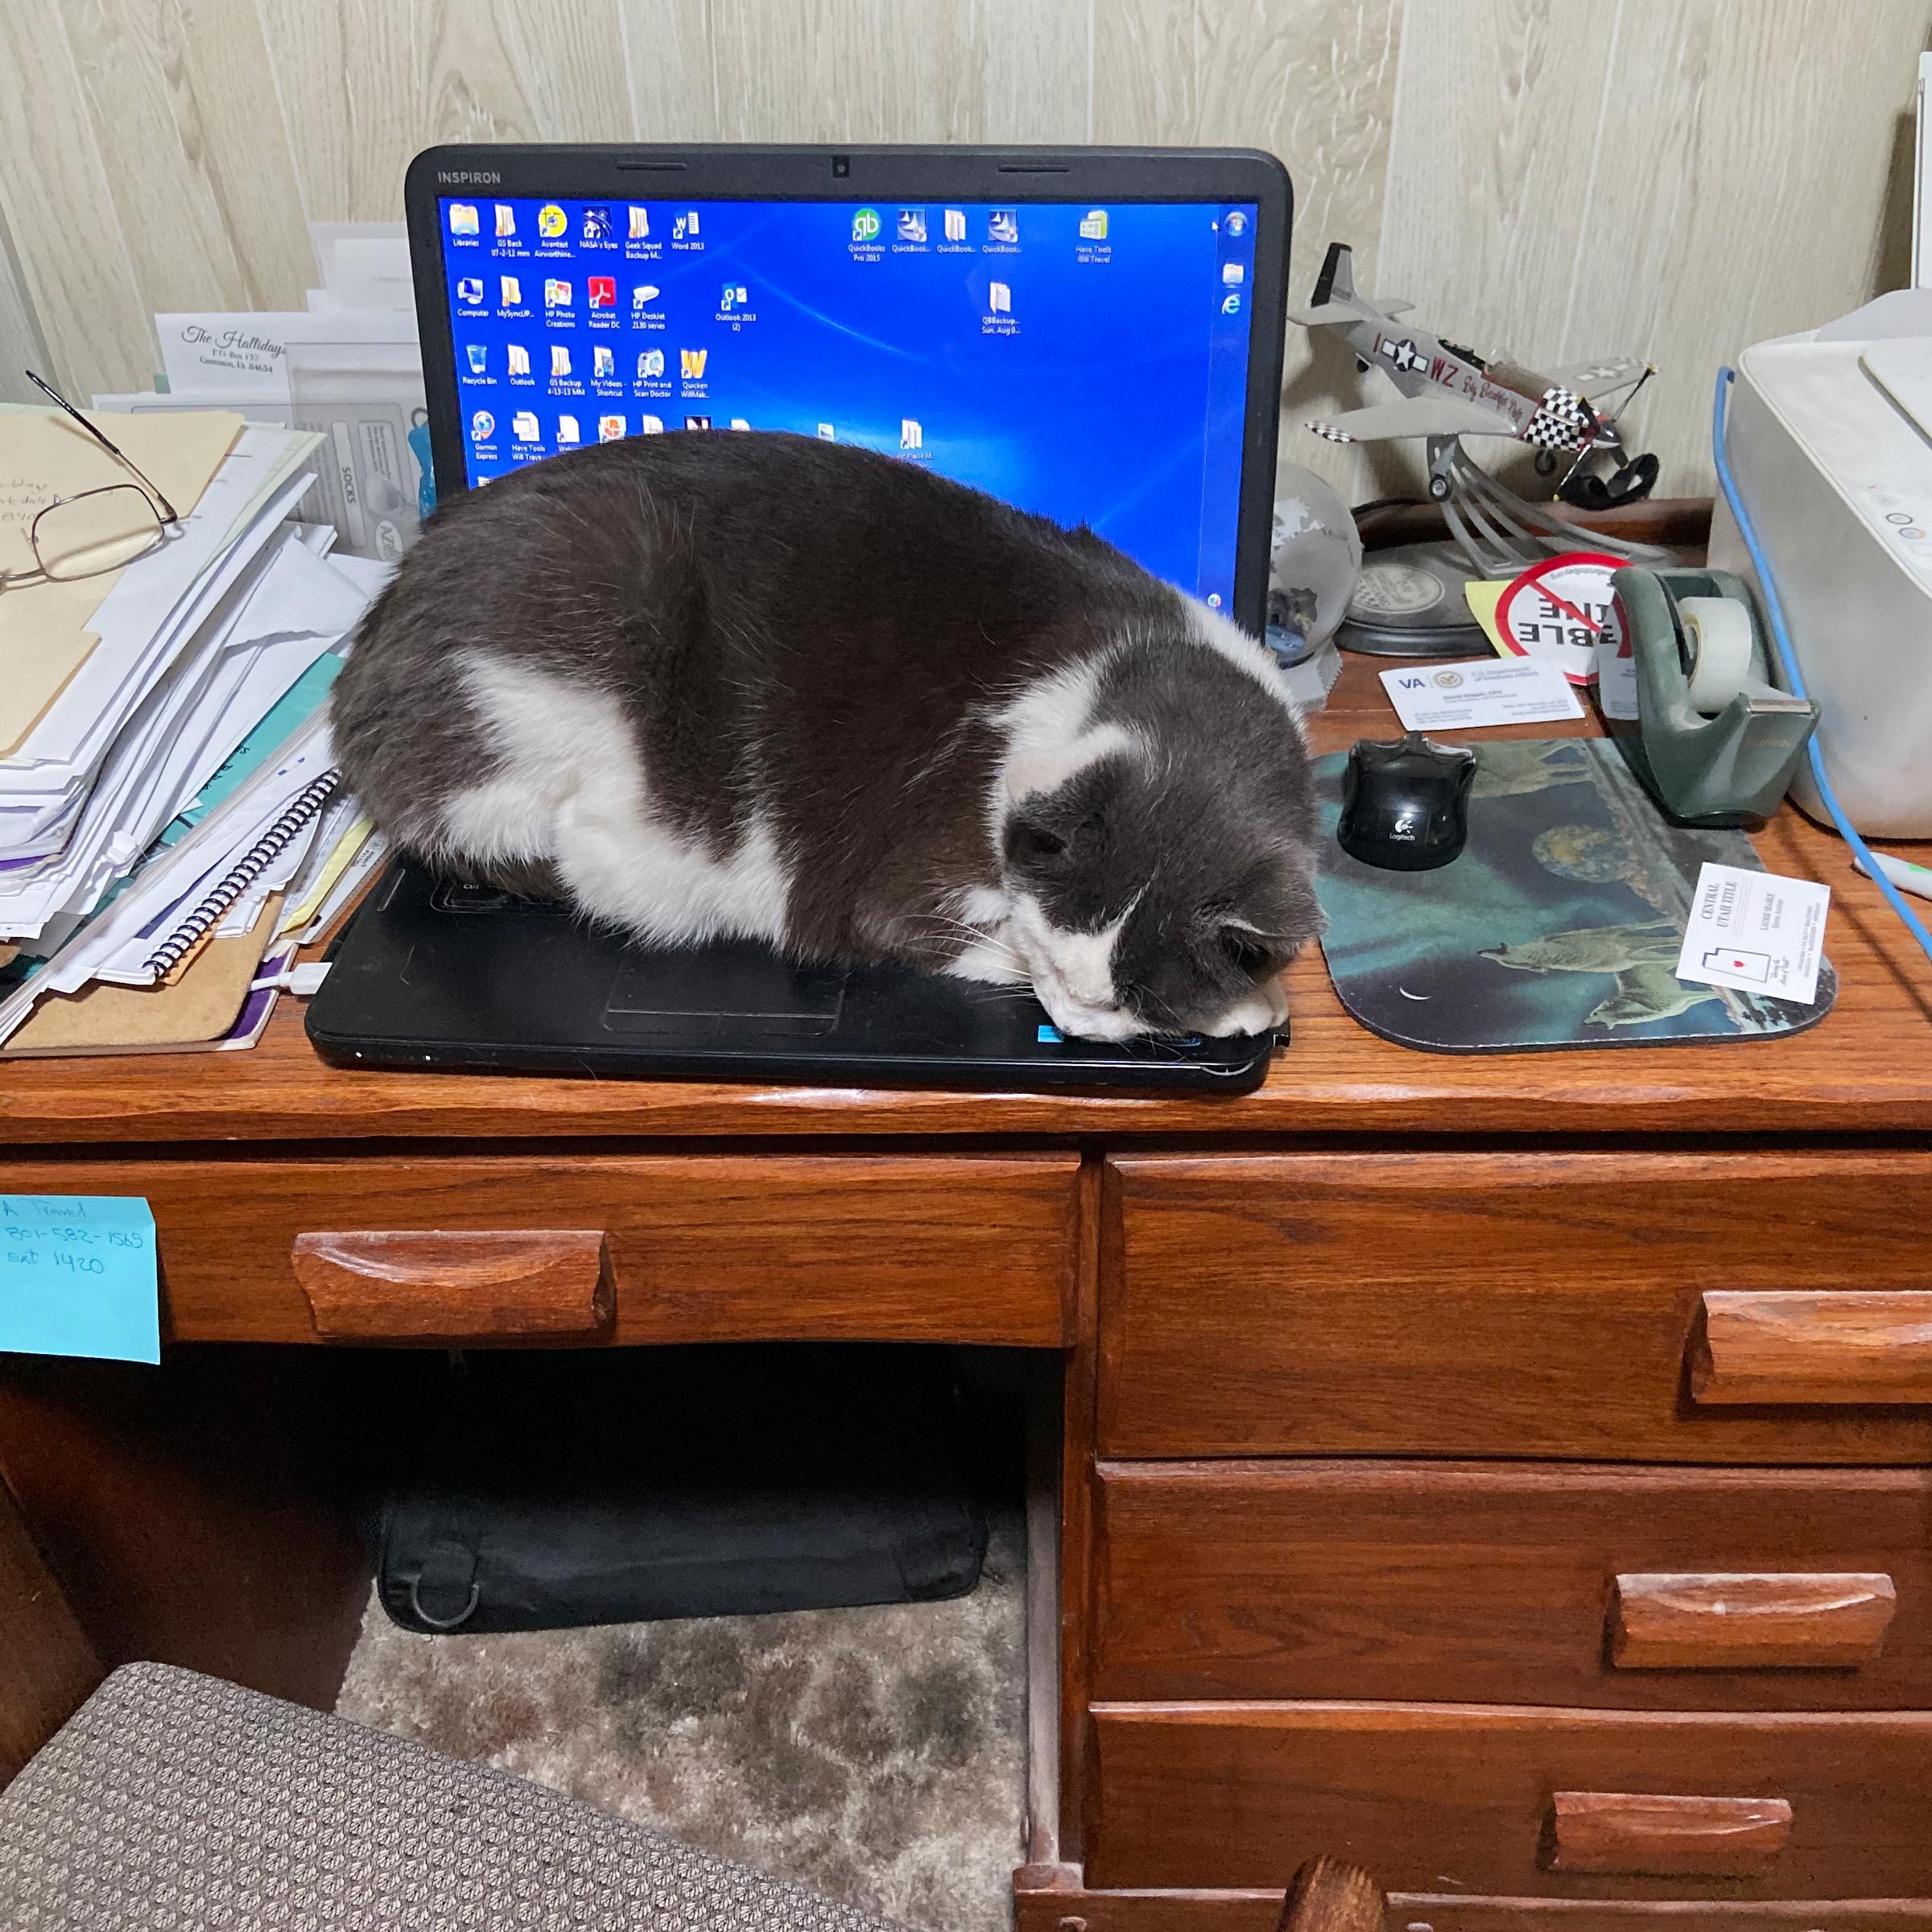 cat taking a nap on the keyboard of an open laptop